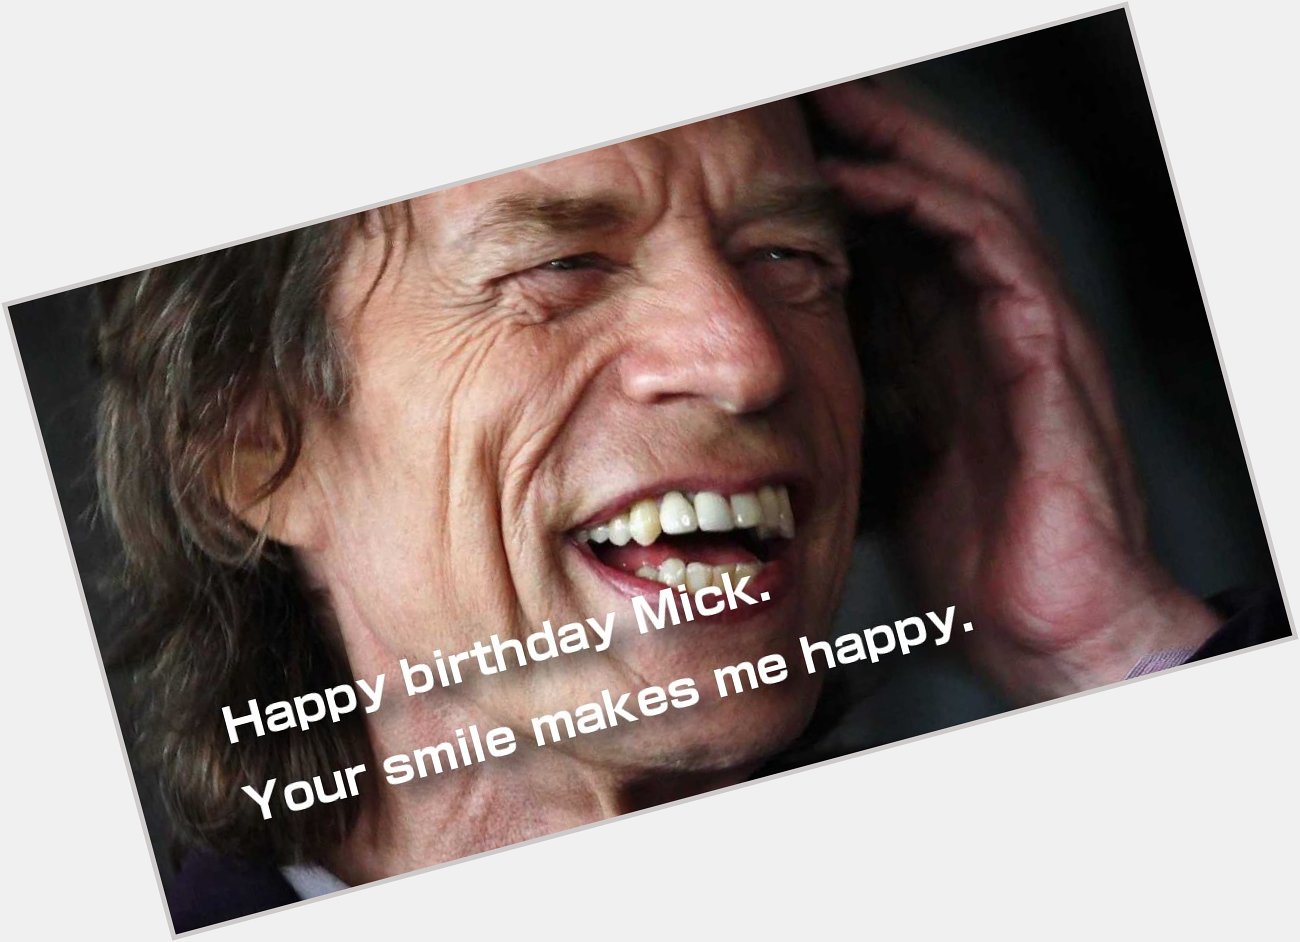 Happy Birthday Mick Jagger.
Hope you have a great year!  